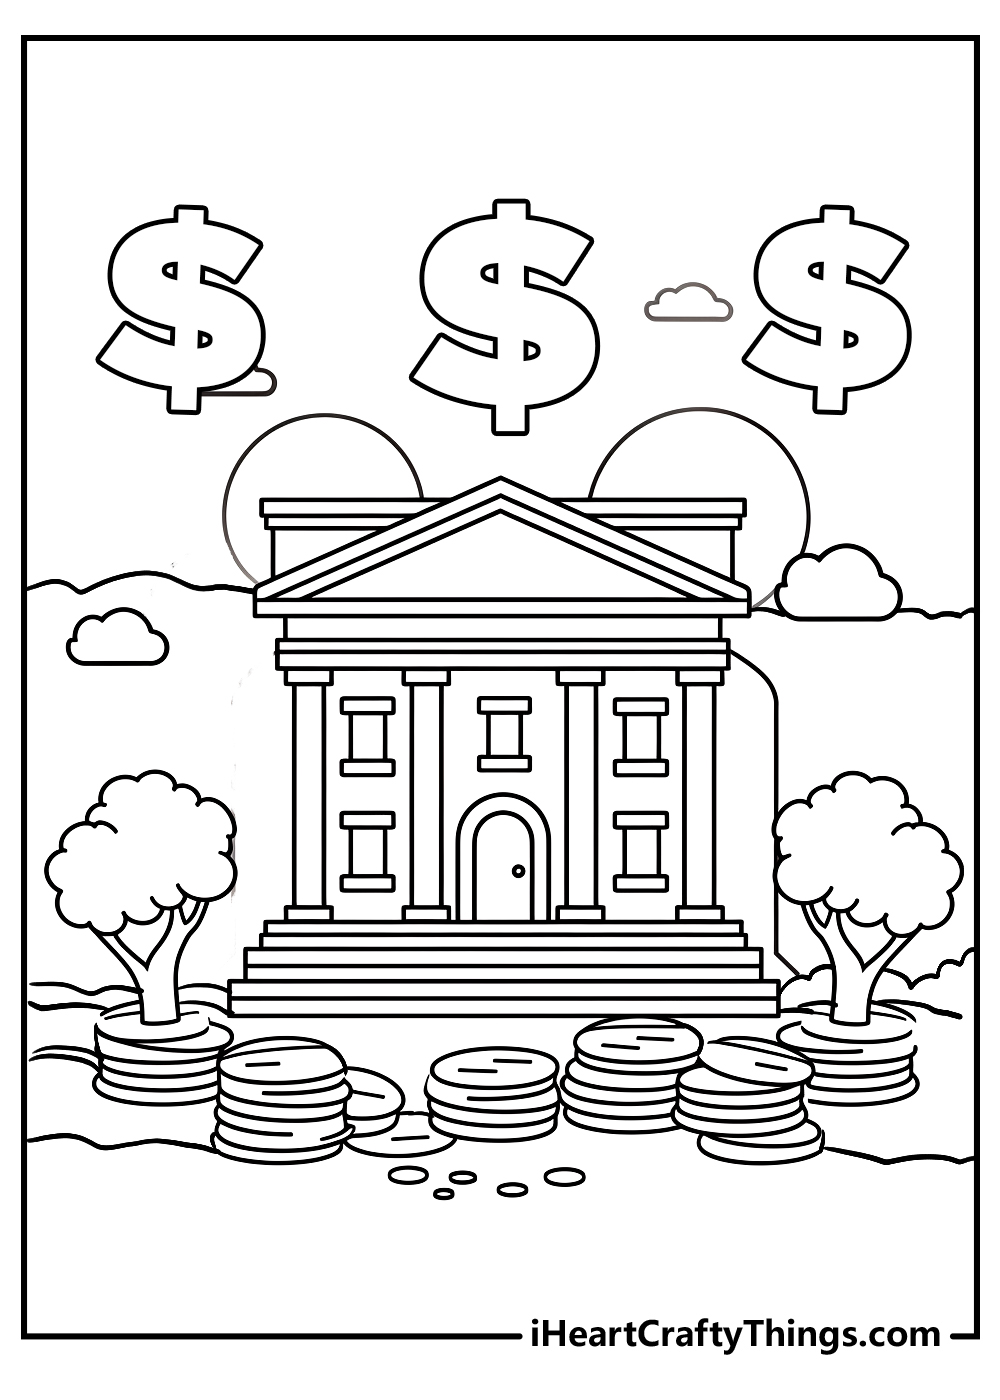 bank coloring pages